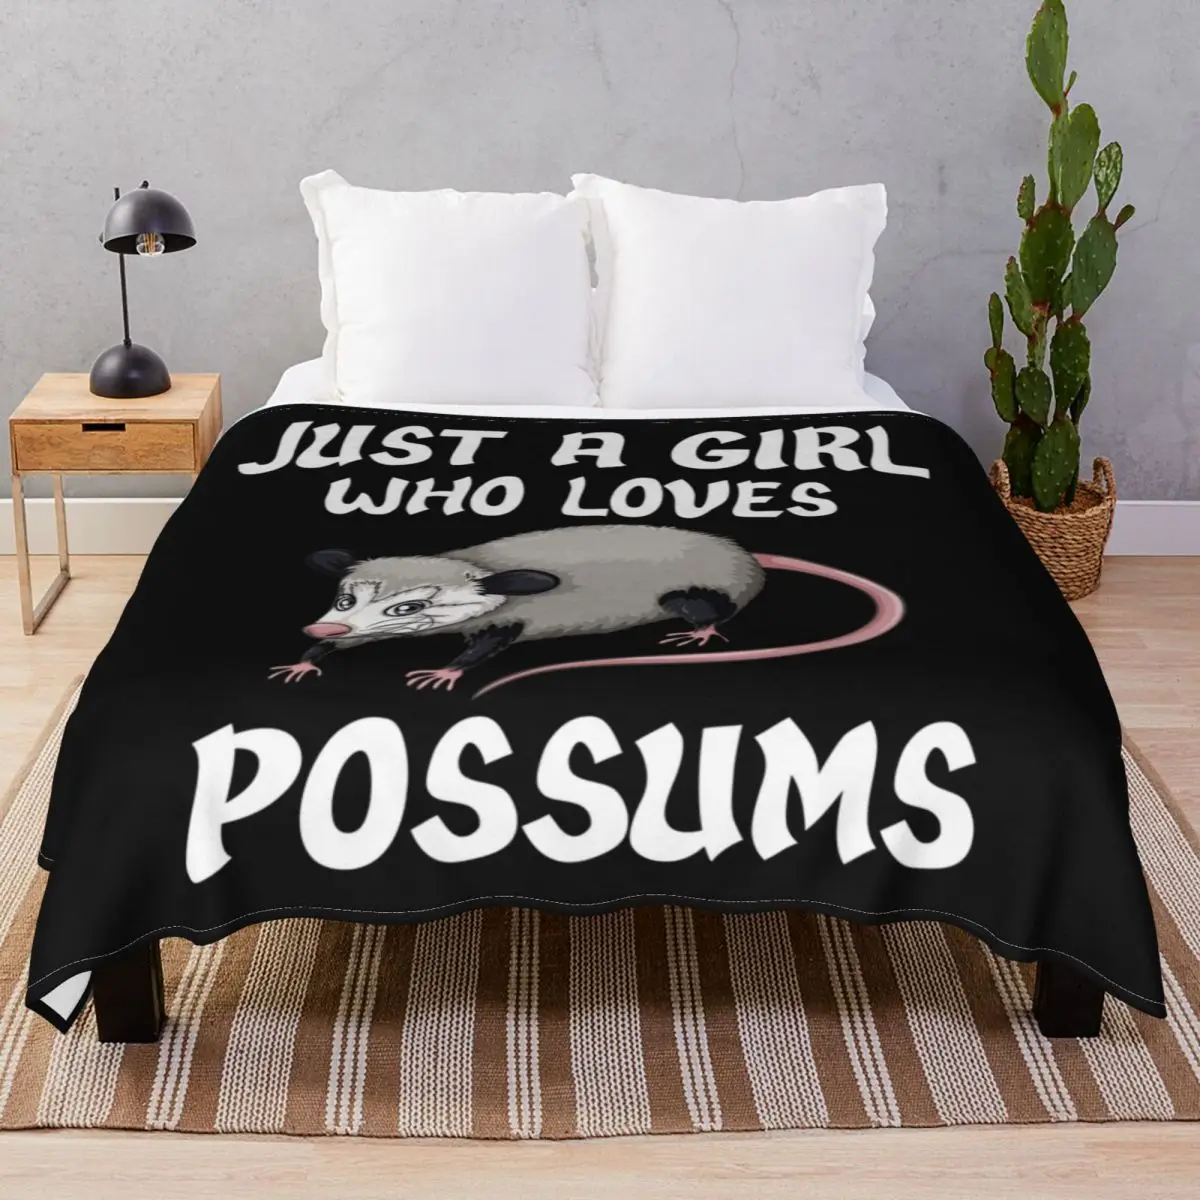 Who Loves Possums Blankets Flannel Plush Decoration Lightweight Throw Blanket for Bedding Home Couch Travel Cinema